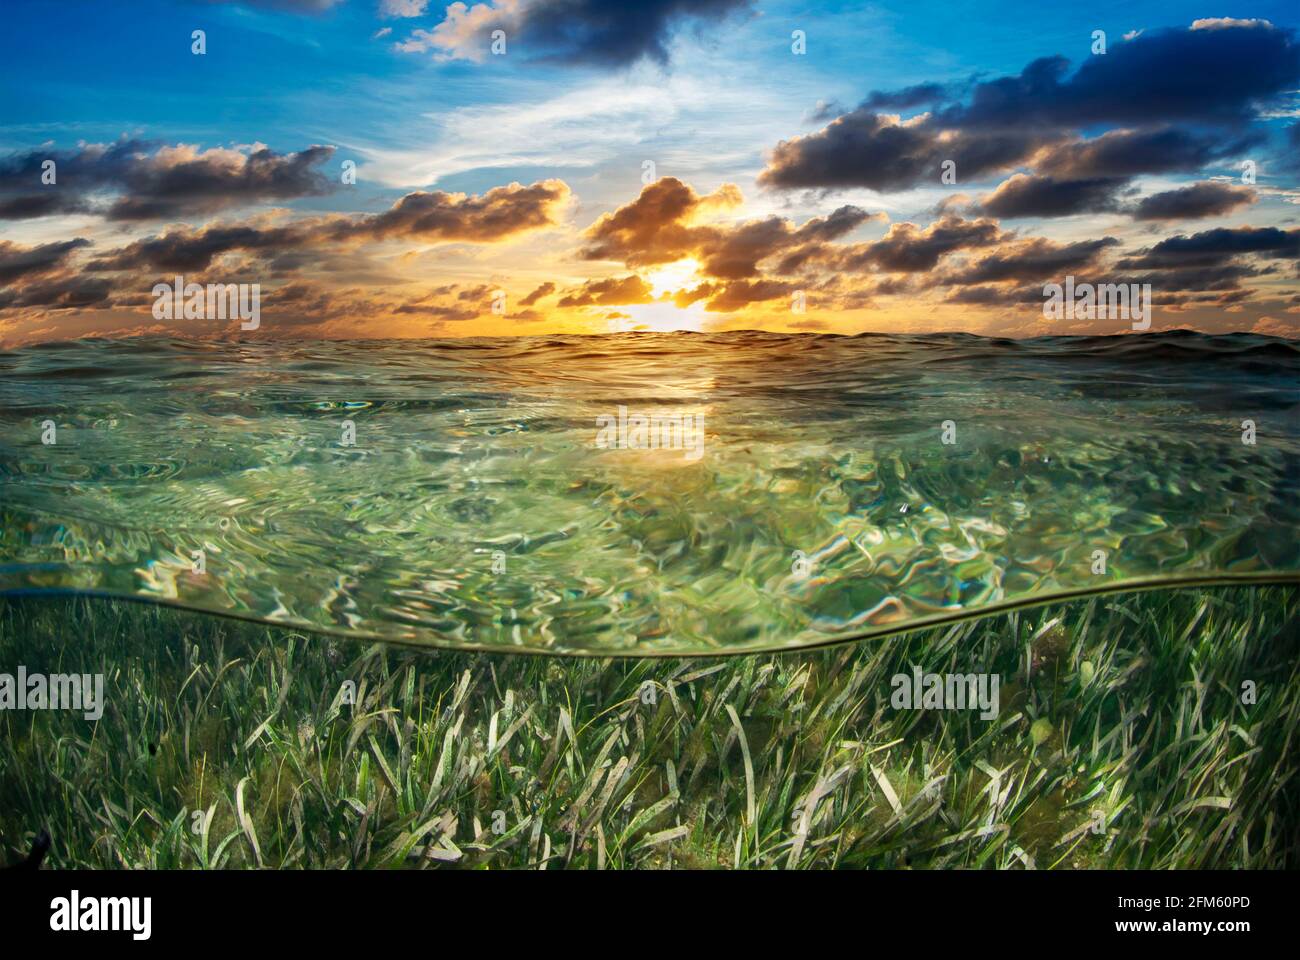 Half above and half below image of Seagrass and sunset Stock Photo